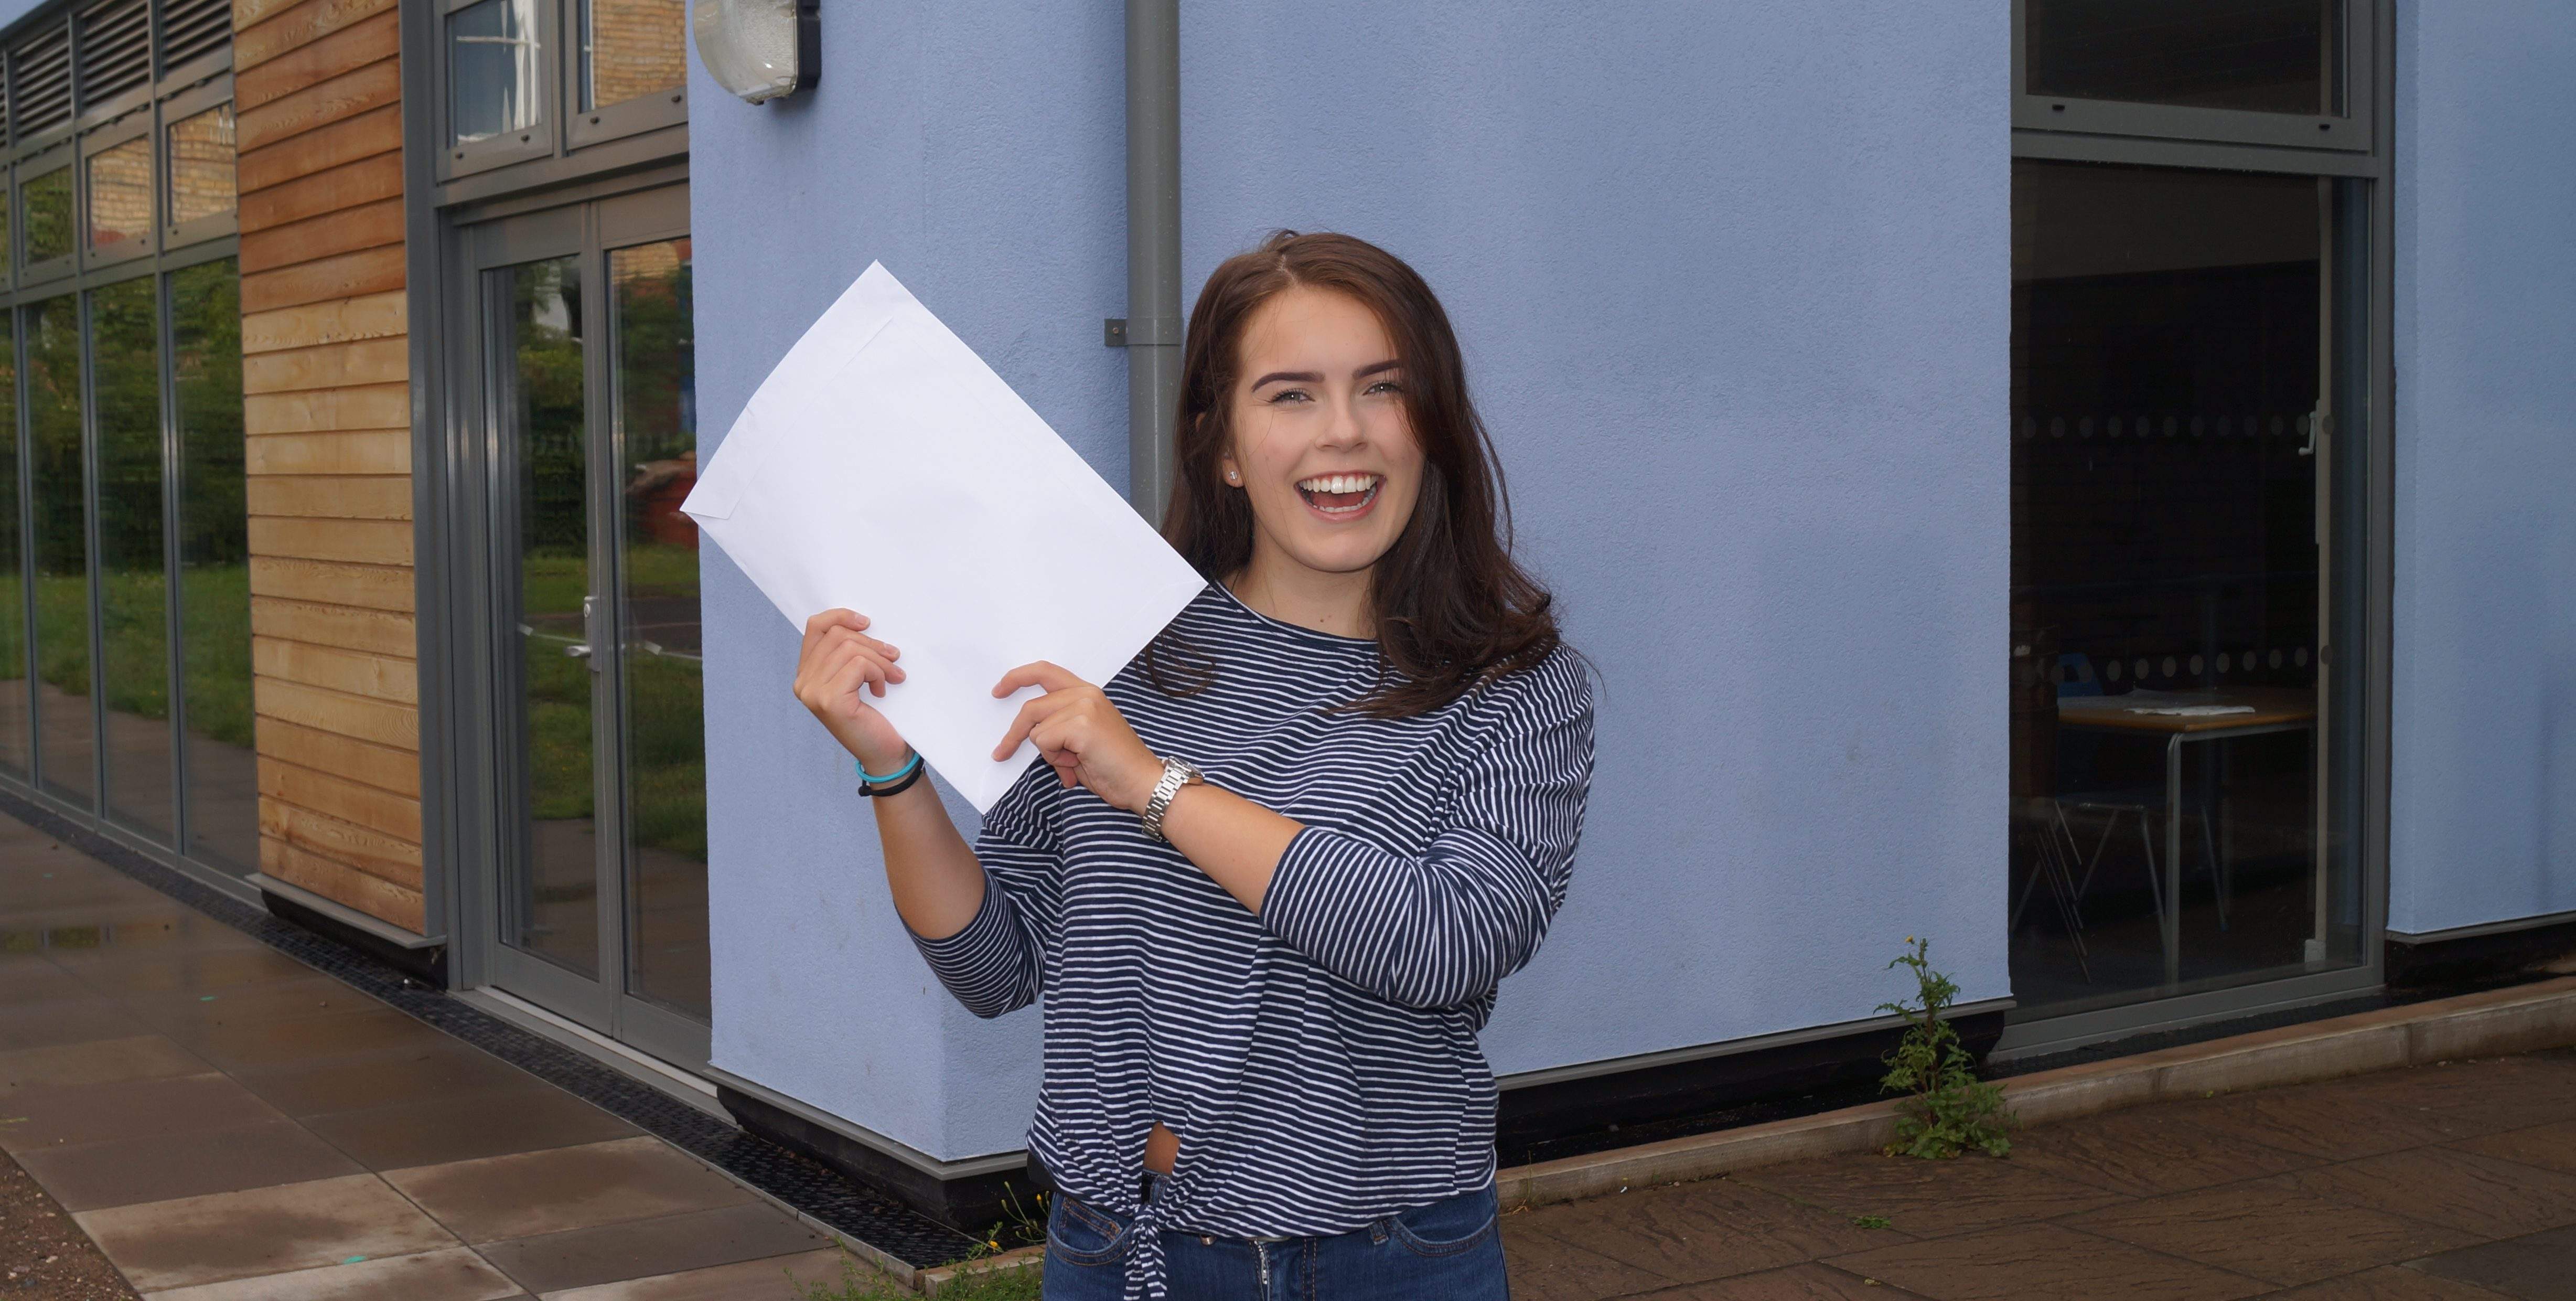 Holy Trinity School’s A Level Success - Year 13 A Level Results Best for Over 10 years – 44% Top Grades A* - B